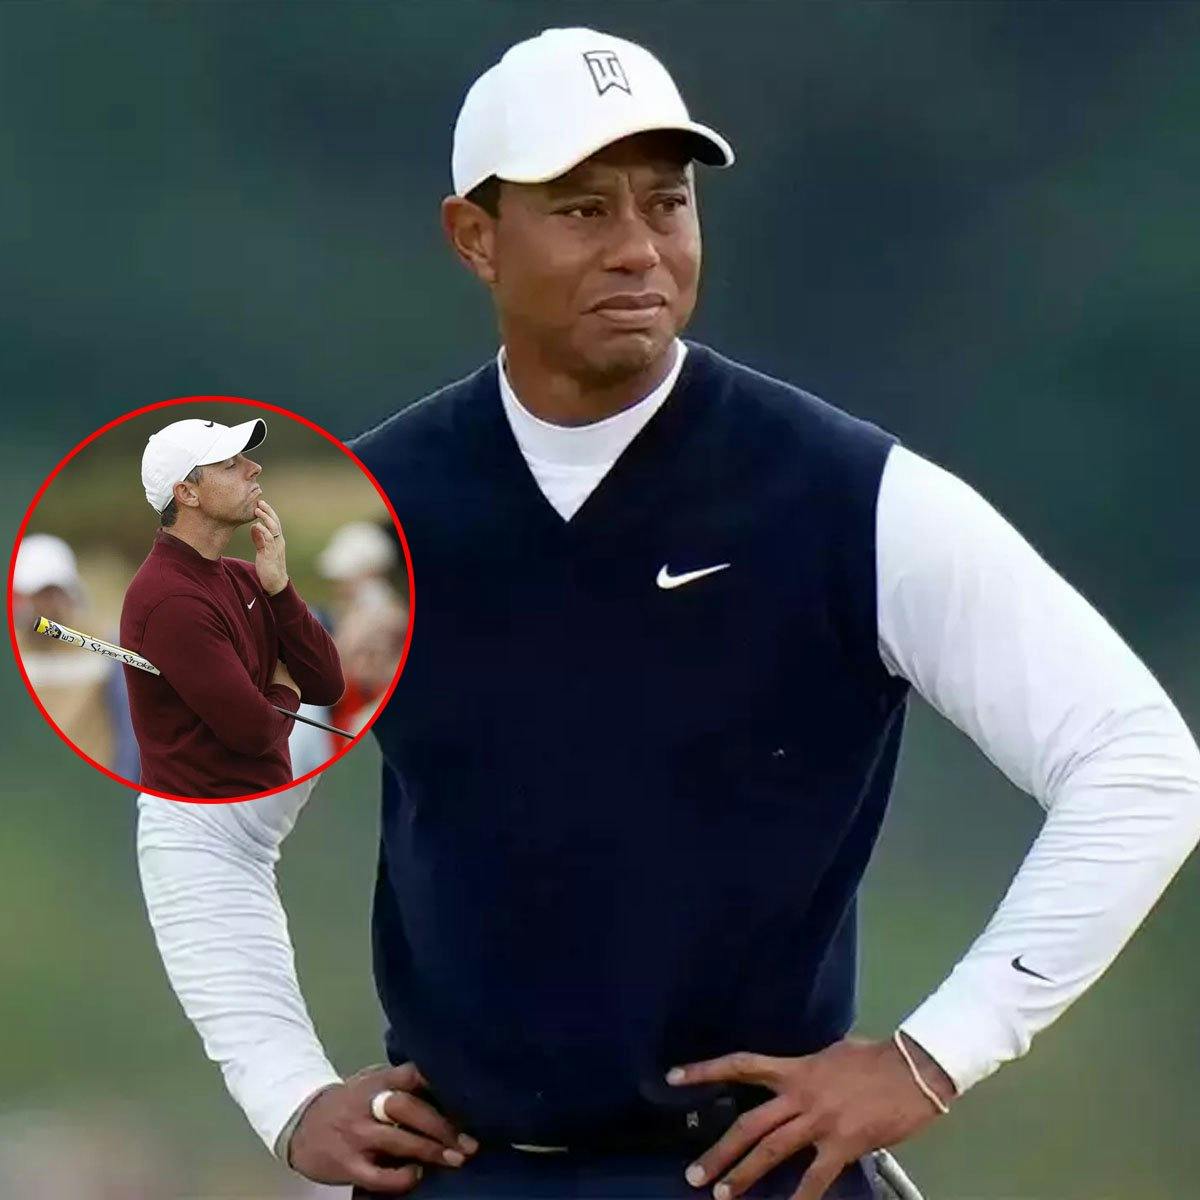 Cover Image for ‘Worse’: Tiger Woods & Rory McIlroy’s TGL Faces Backlash as Latest Moves Leaves Fans Unimpressed